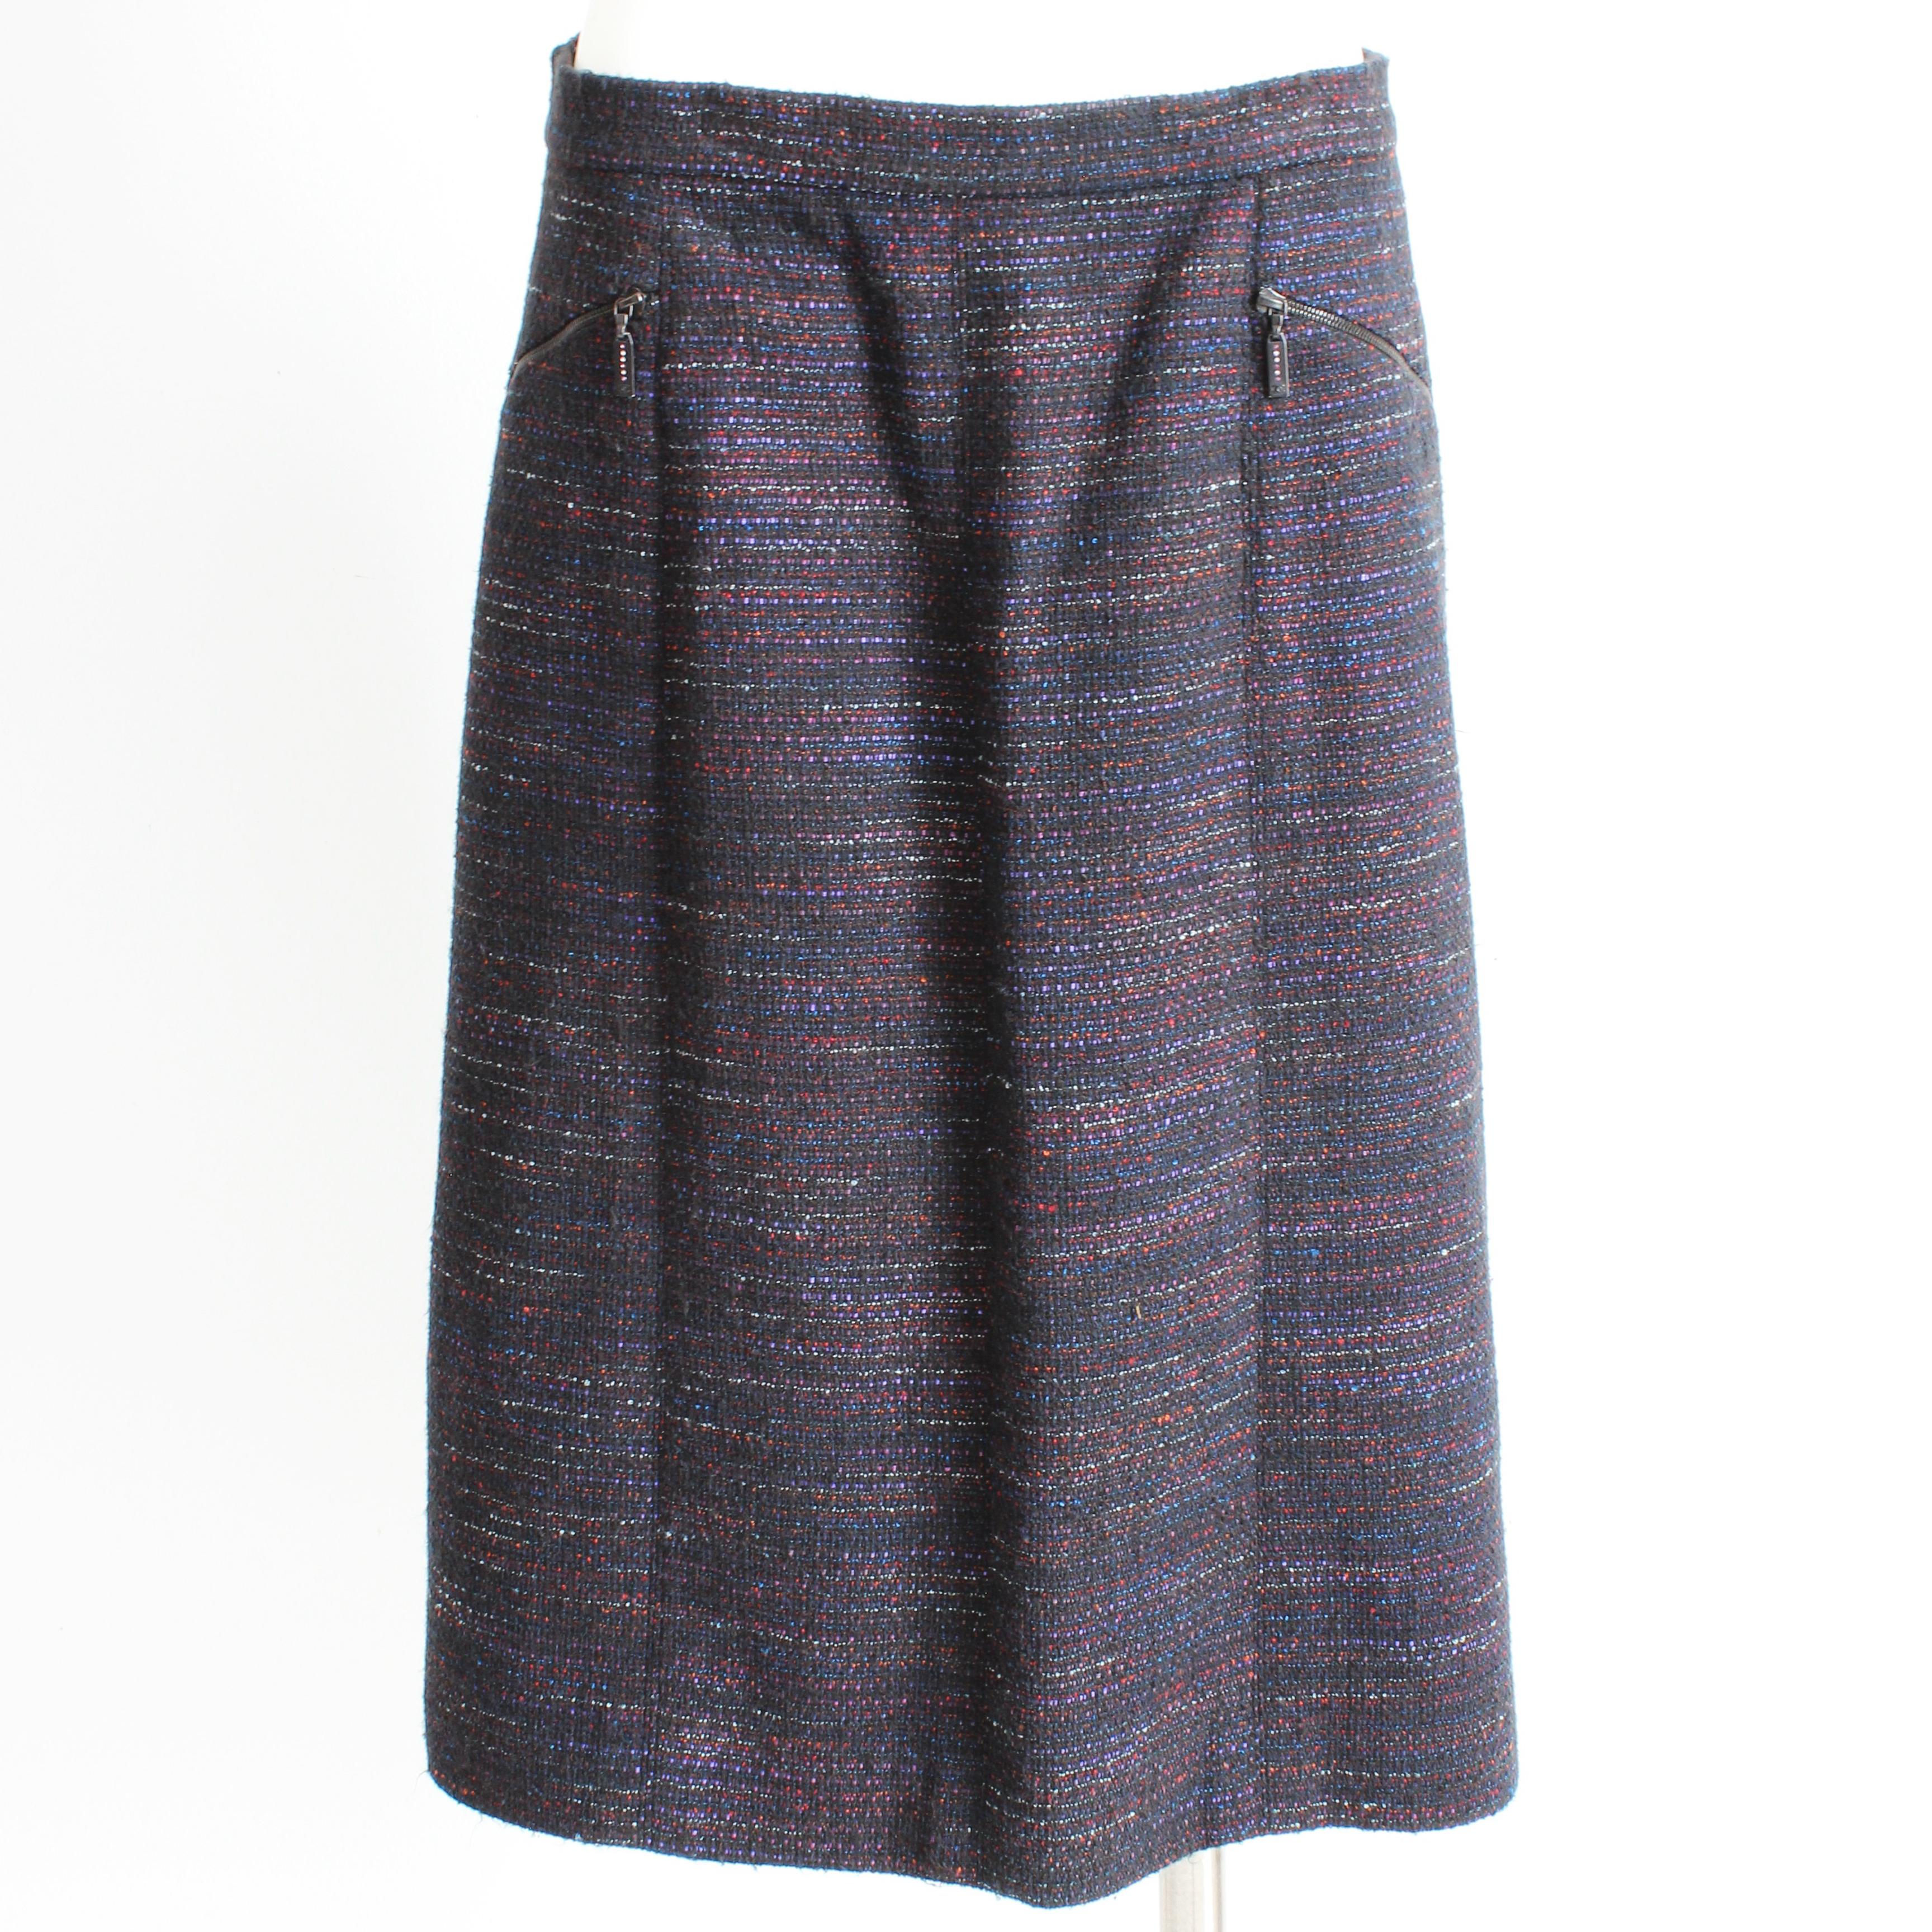 Chanel Skirt Multicolor Cotton Blend Tweed Pencil Style 02A Collection Size 40 For Sale 5